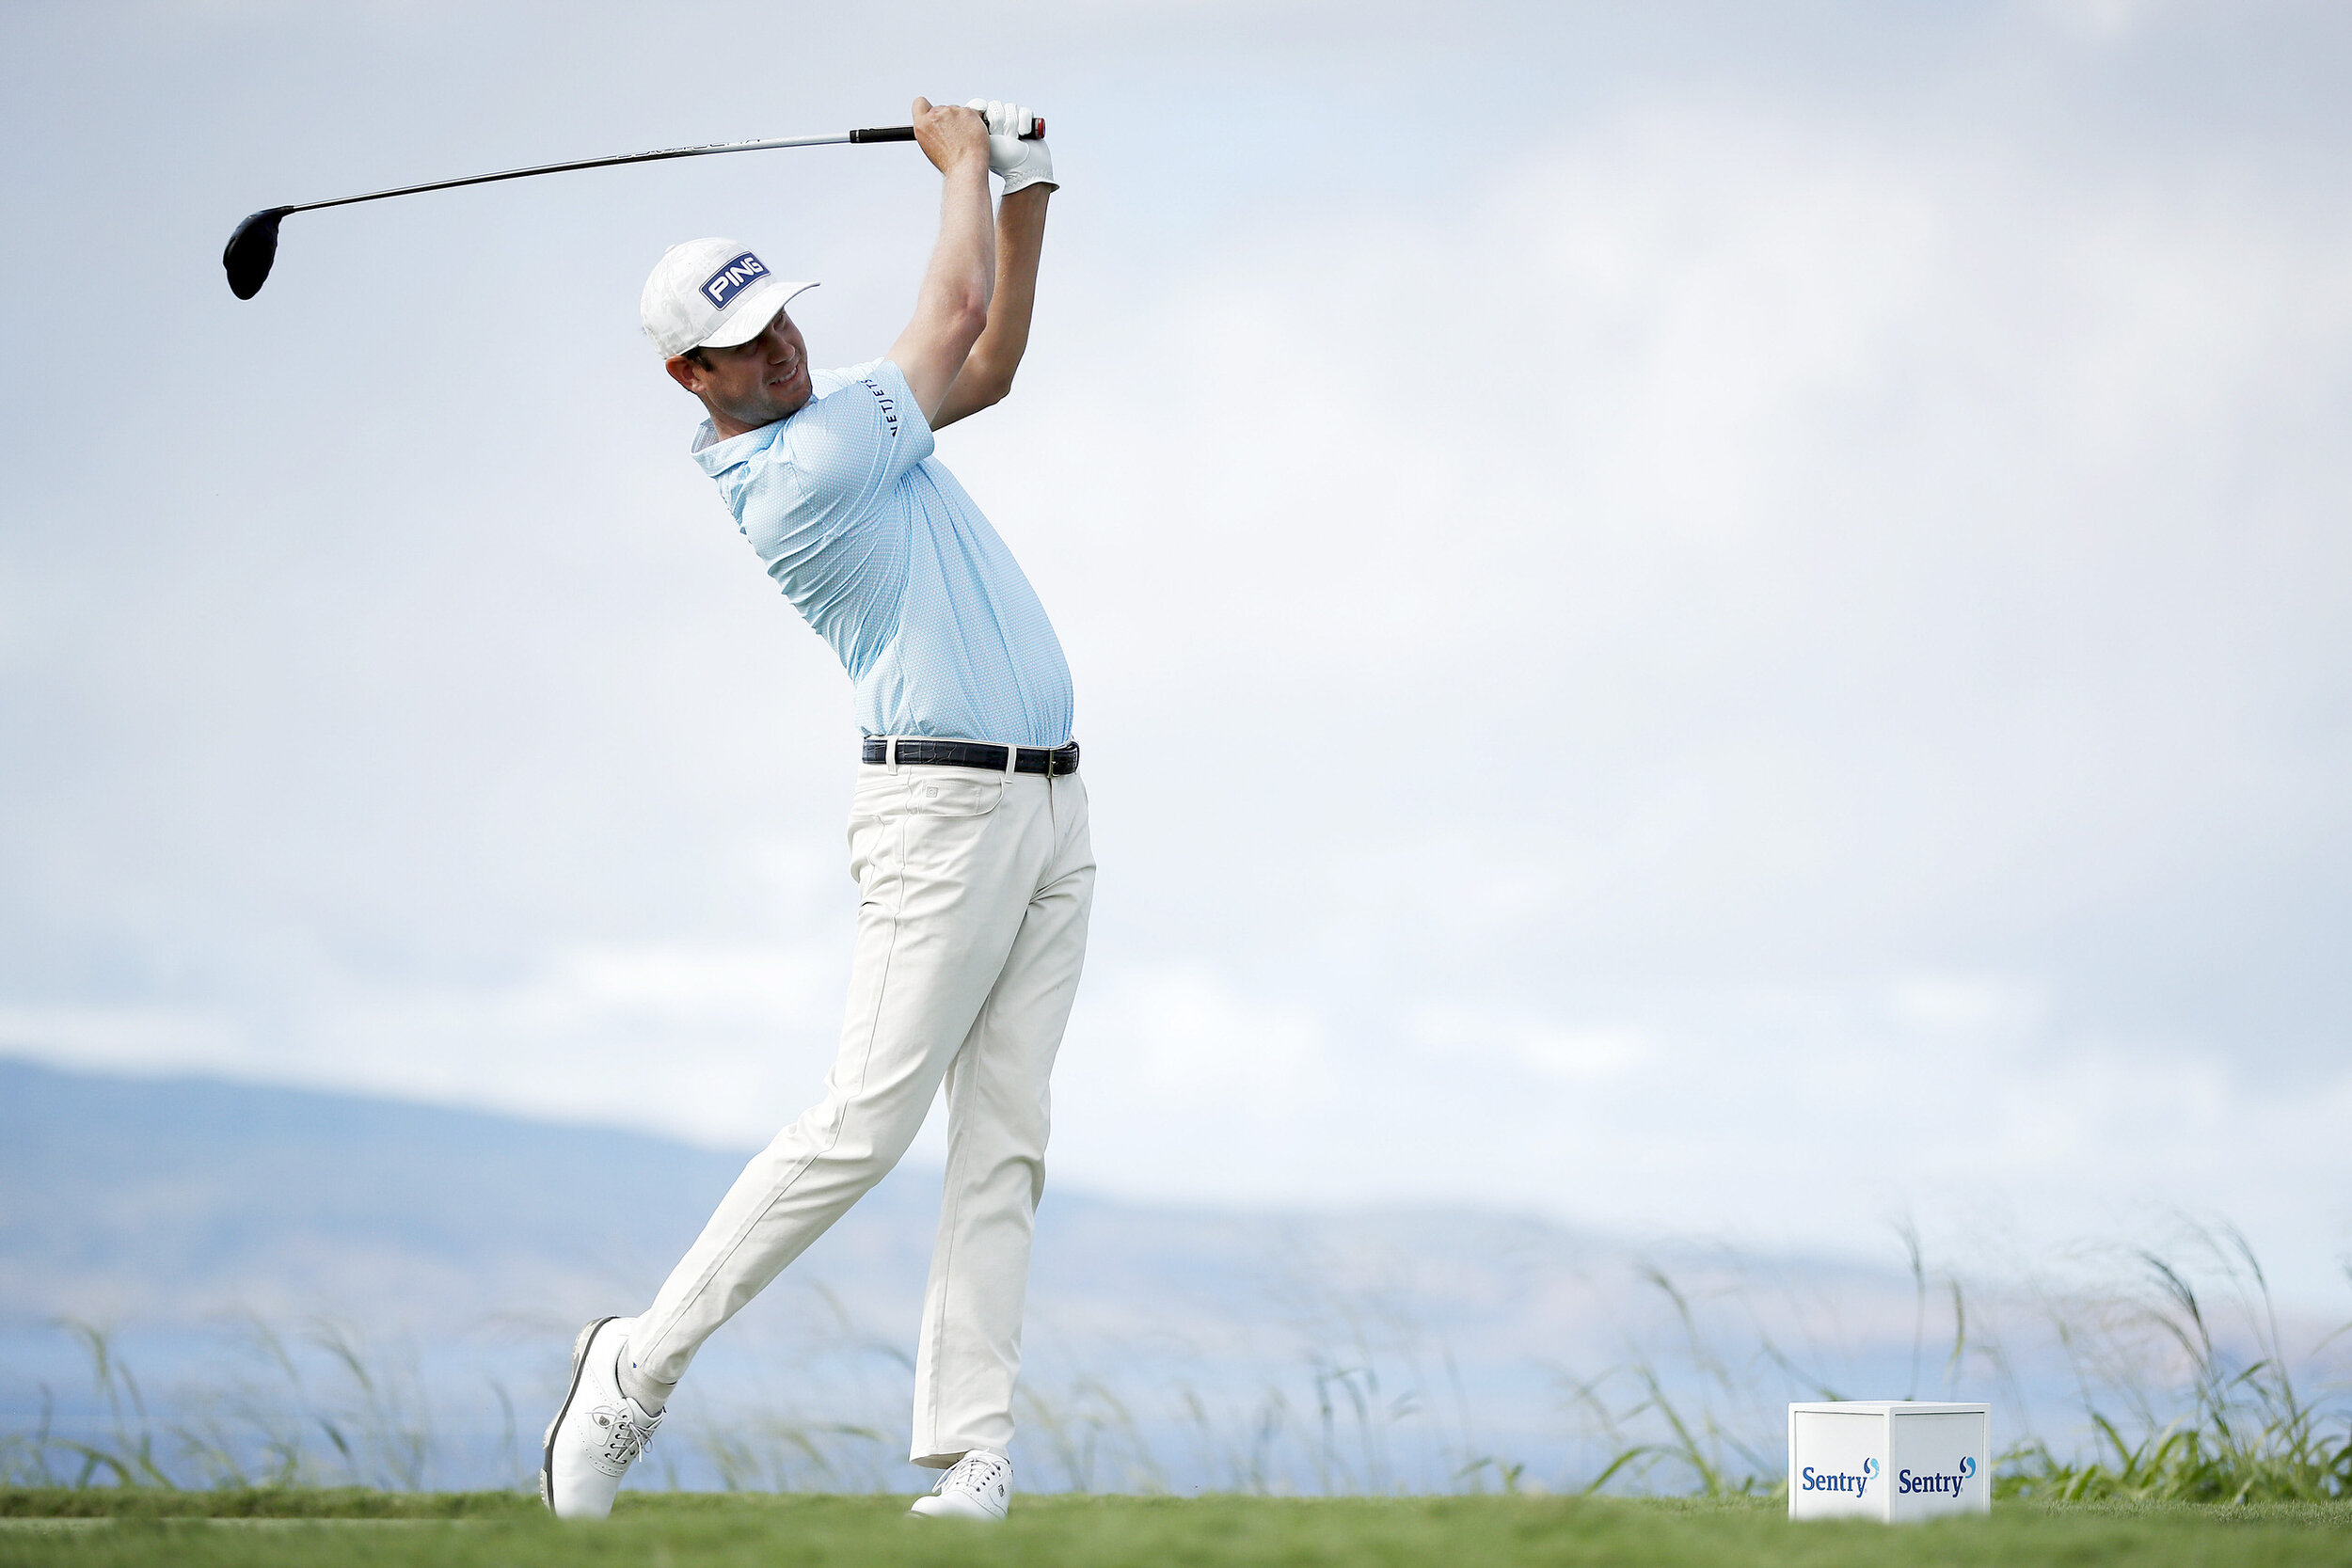  KAPALUA, HAWAII - JANUARY 09: Harris English of the United States plays his shot from the 13th tee during the third round of the Sentry Tournament Of Champions at the Kapalua Plantation Course on January 09, 2021 in Kapalua, Hawaii. (Photo by Cliff 